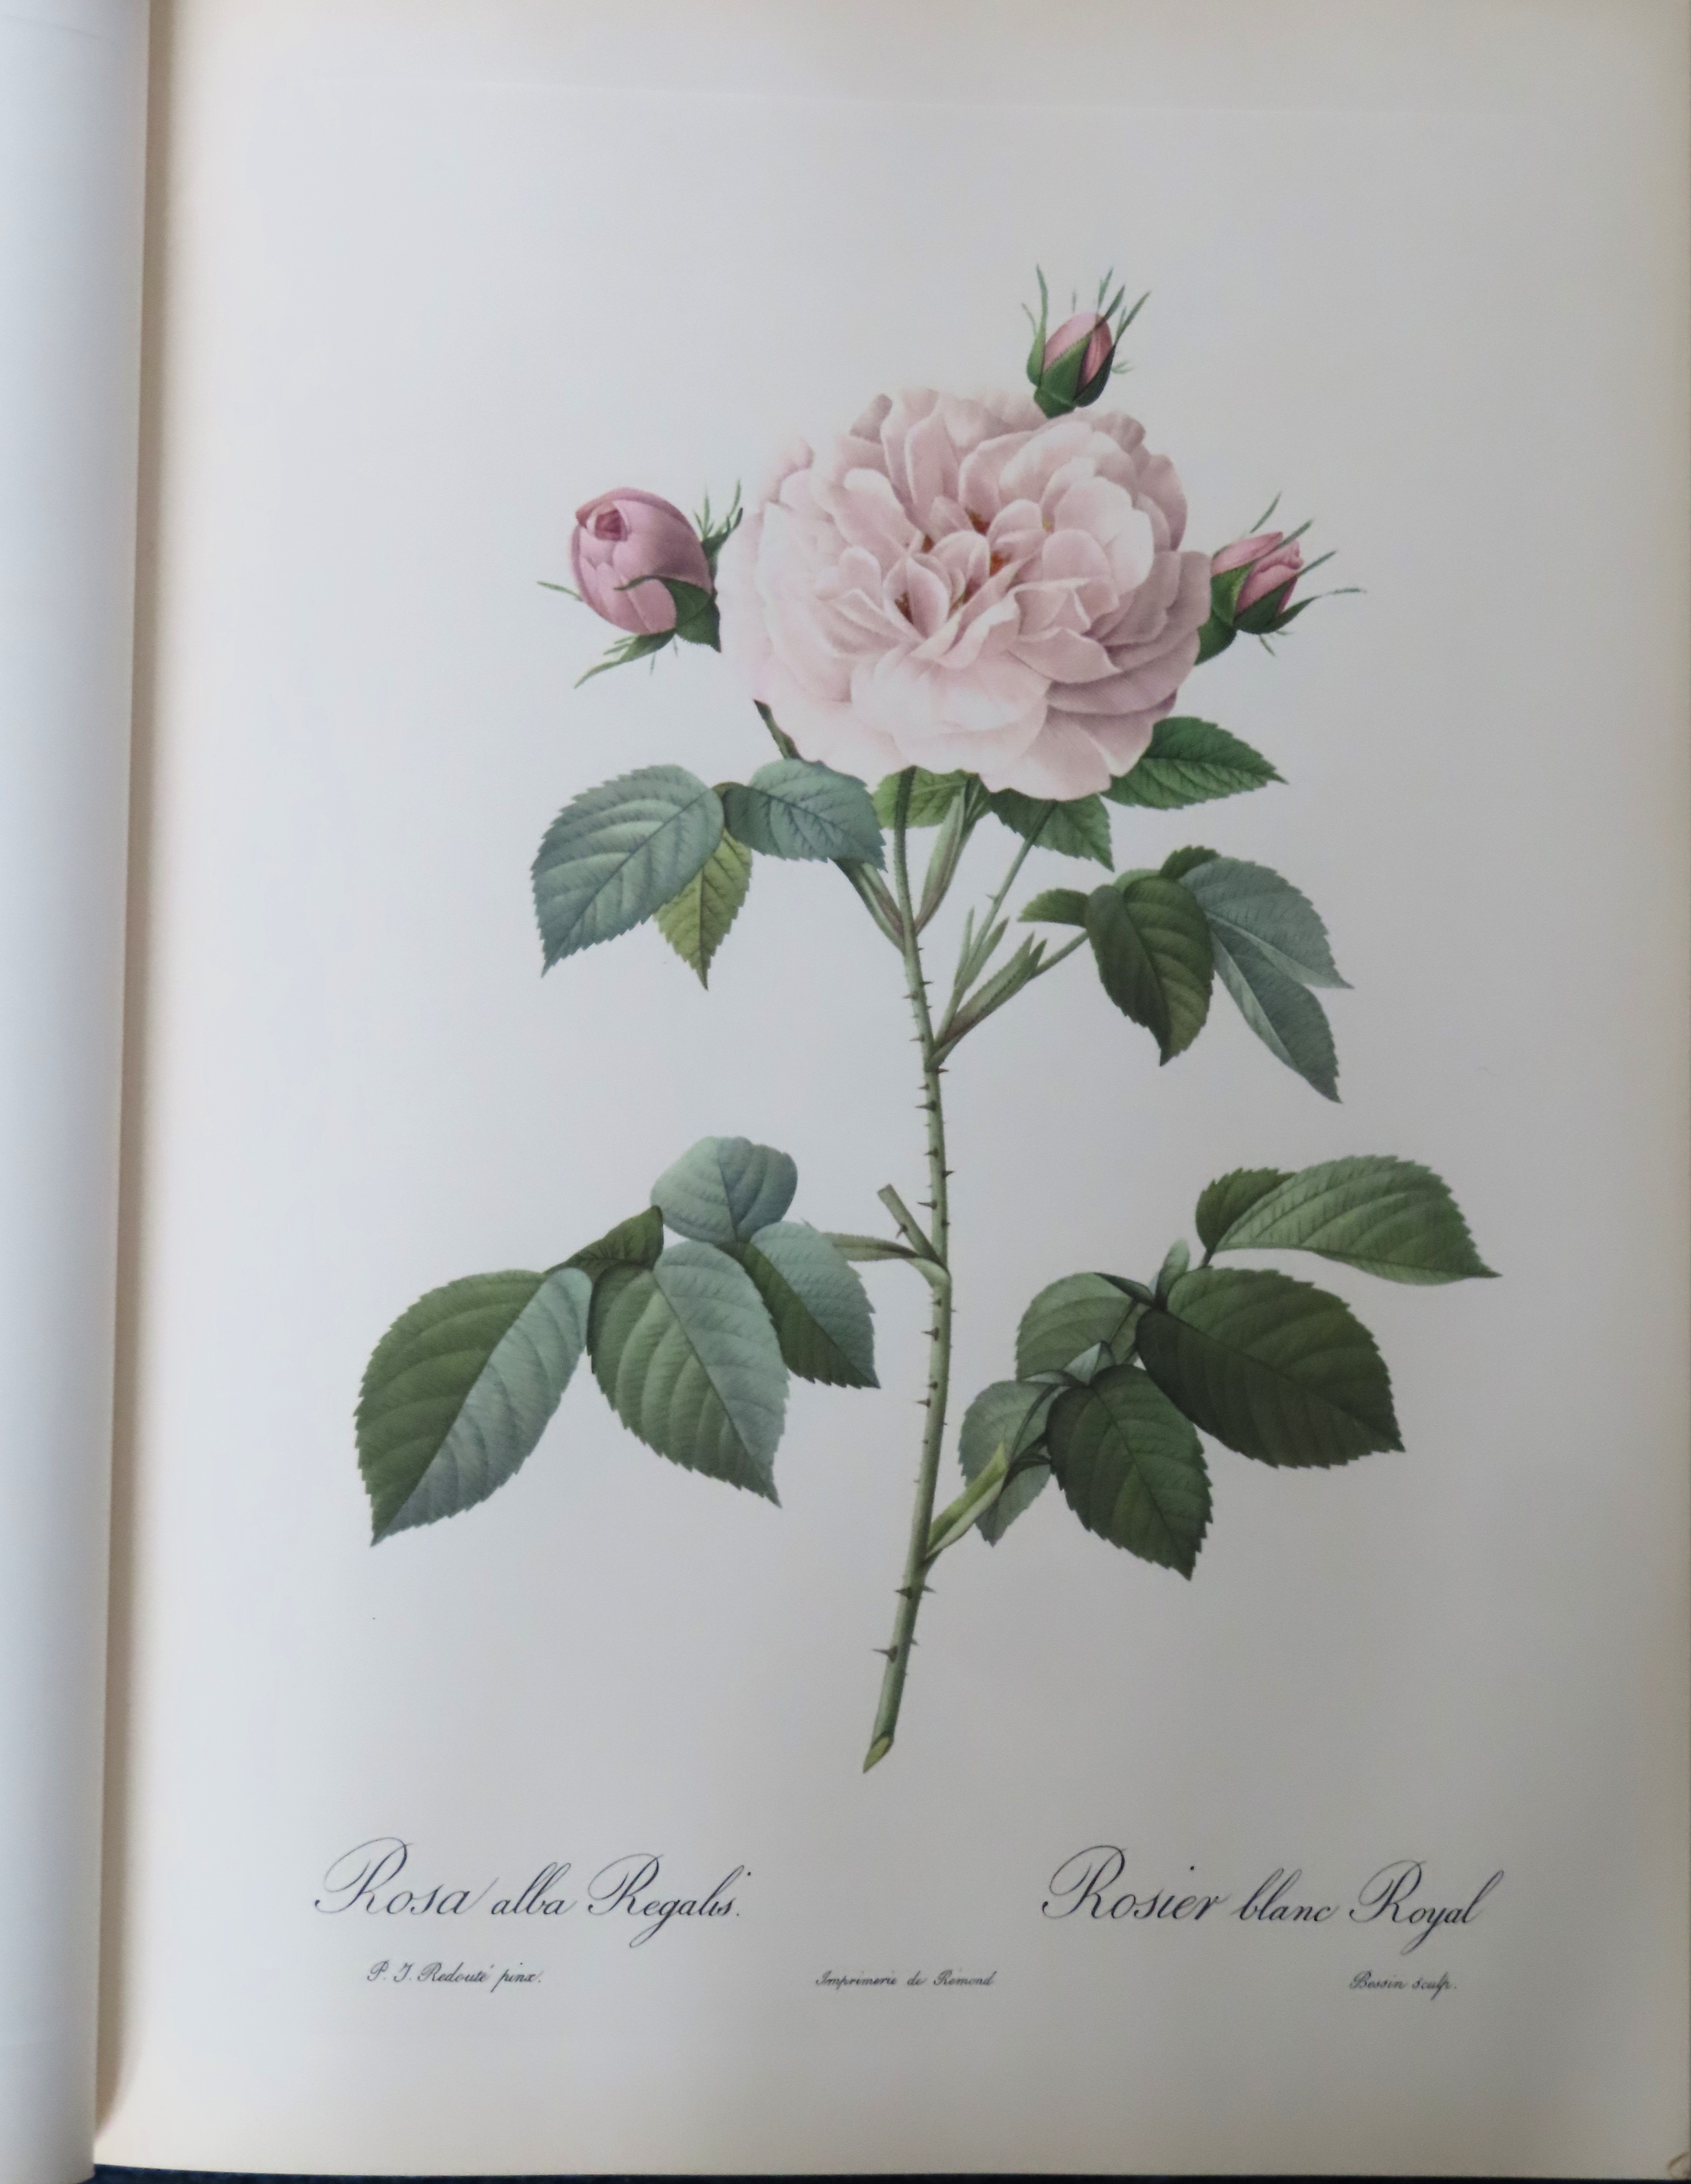 Pierre Joseph Redoute aerial press set of polychrome plates - Roses Reasonable used condition - Image 2 of 3